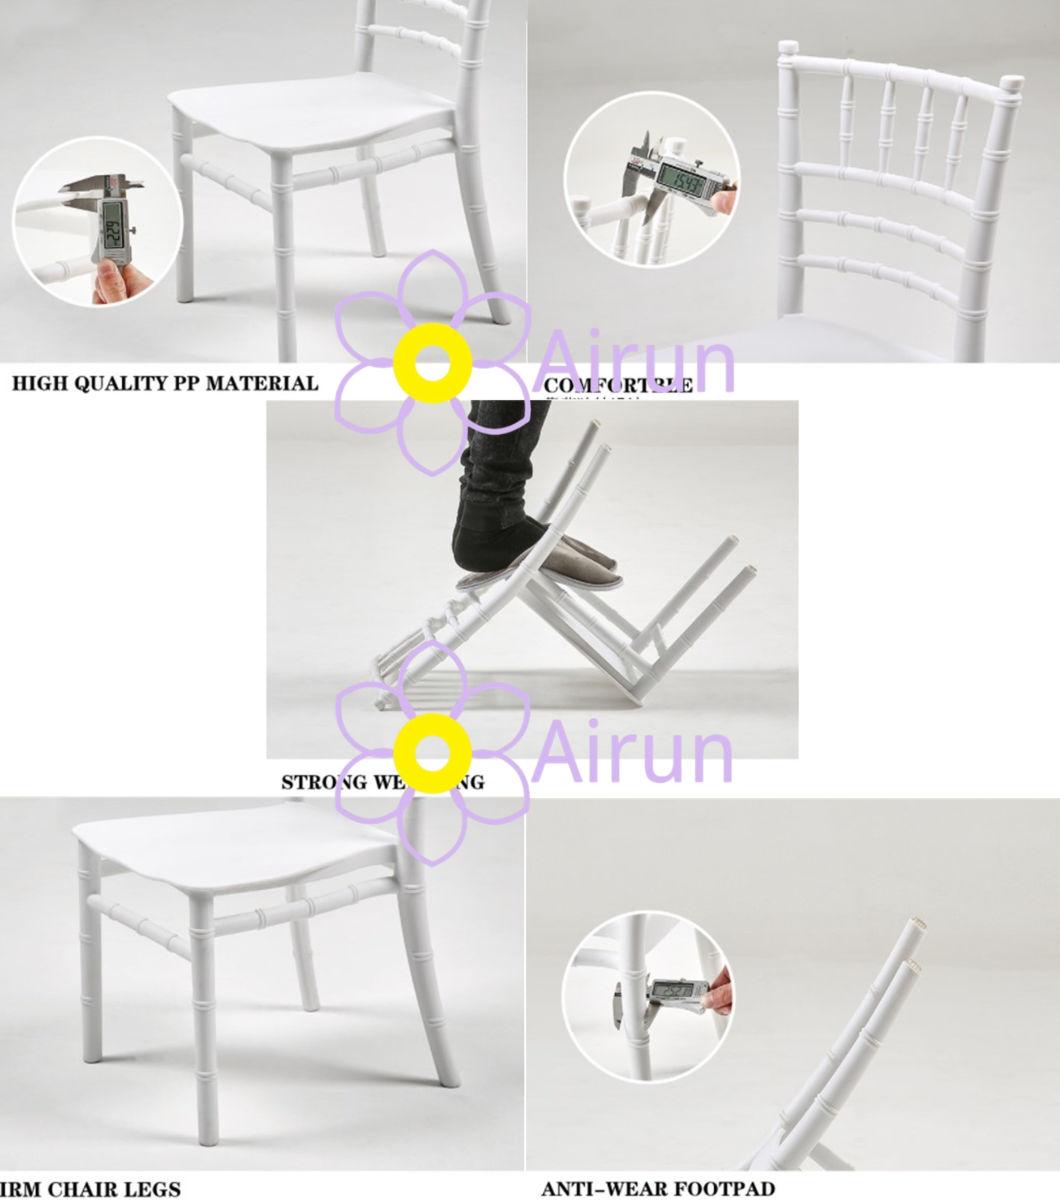 Hot Sale Stackable White Plastic Kids Tiffany Chiavari Chairs for Children Party